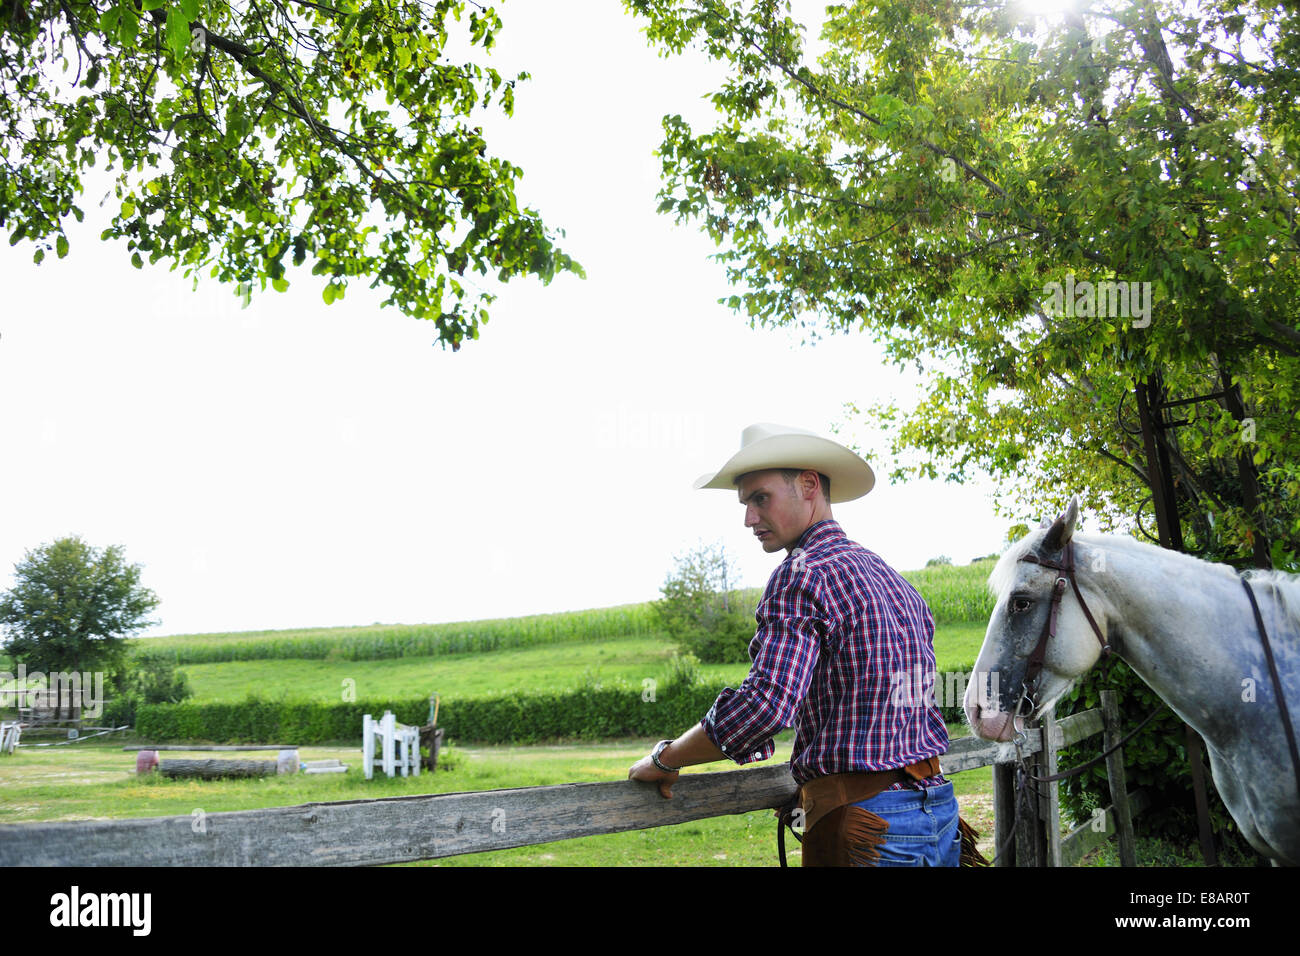 Young man in cowboy gear with horse checking fence Stock Photo